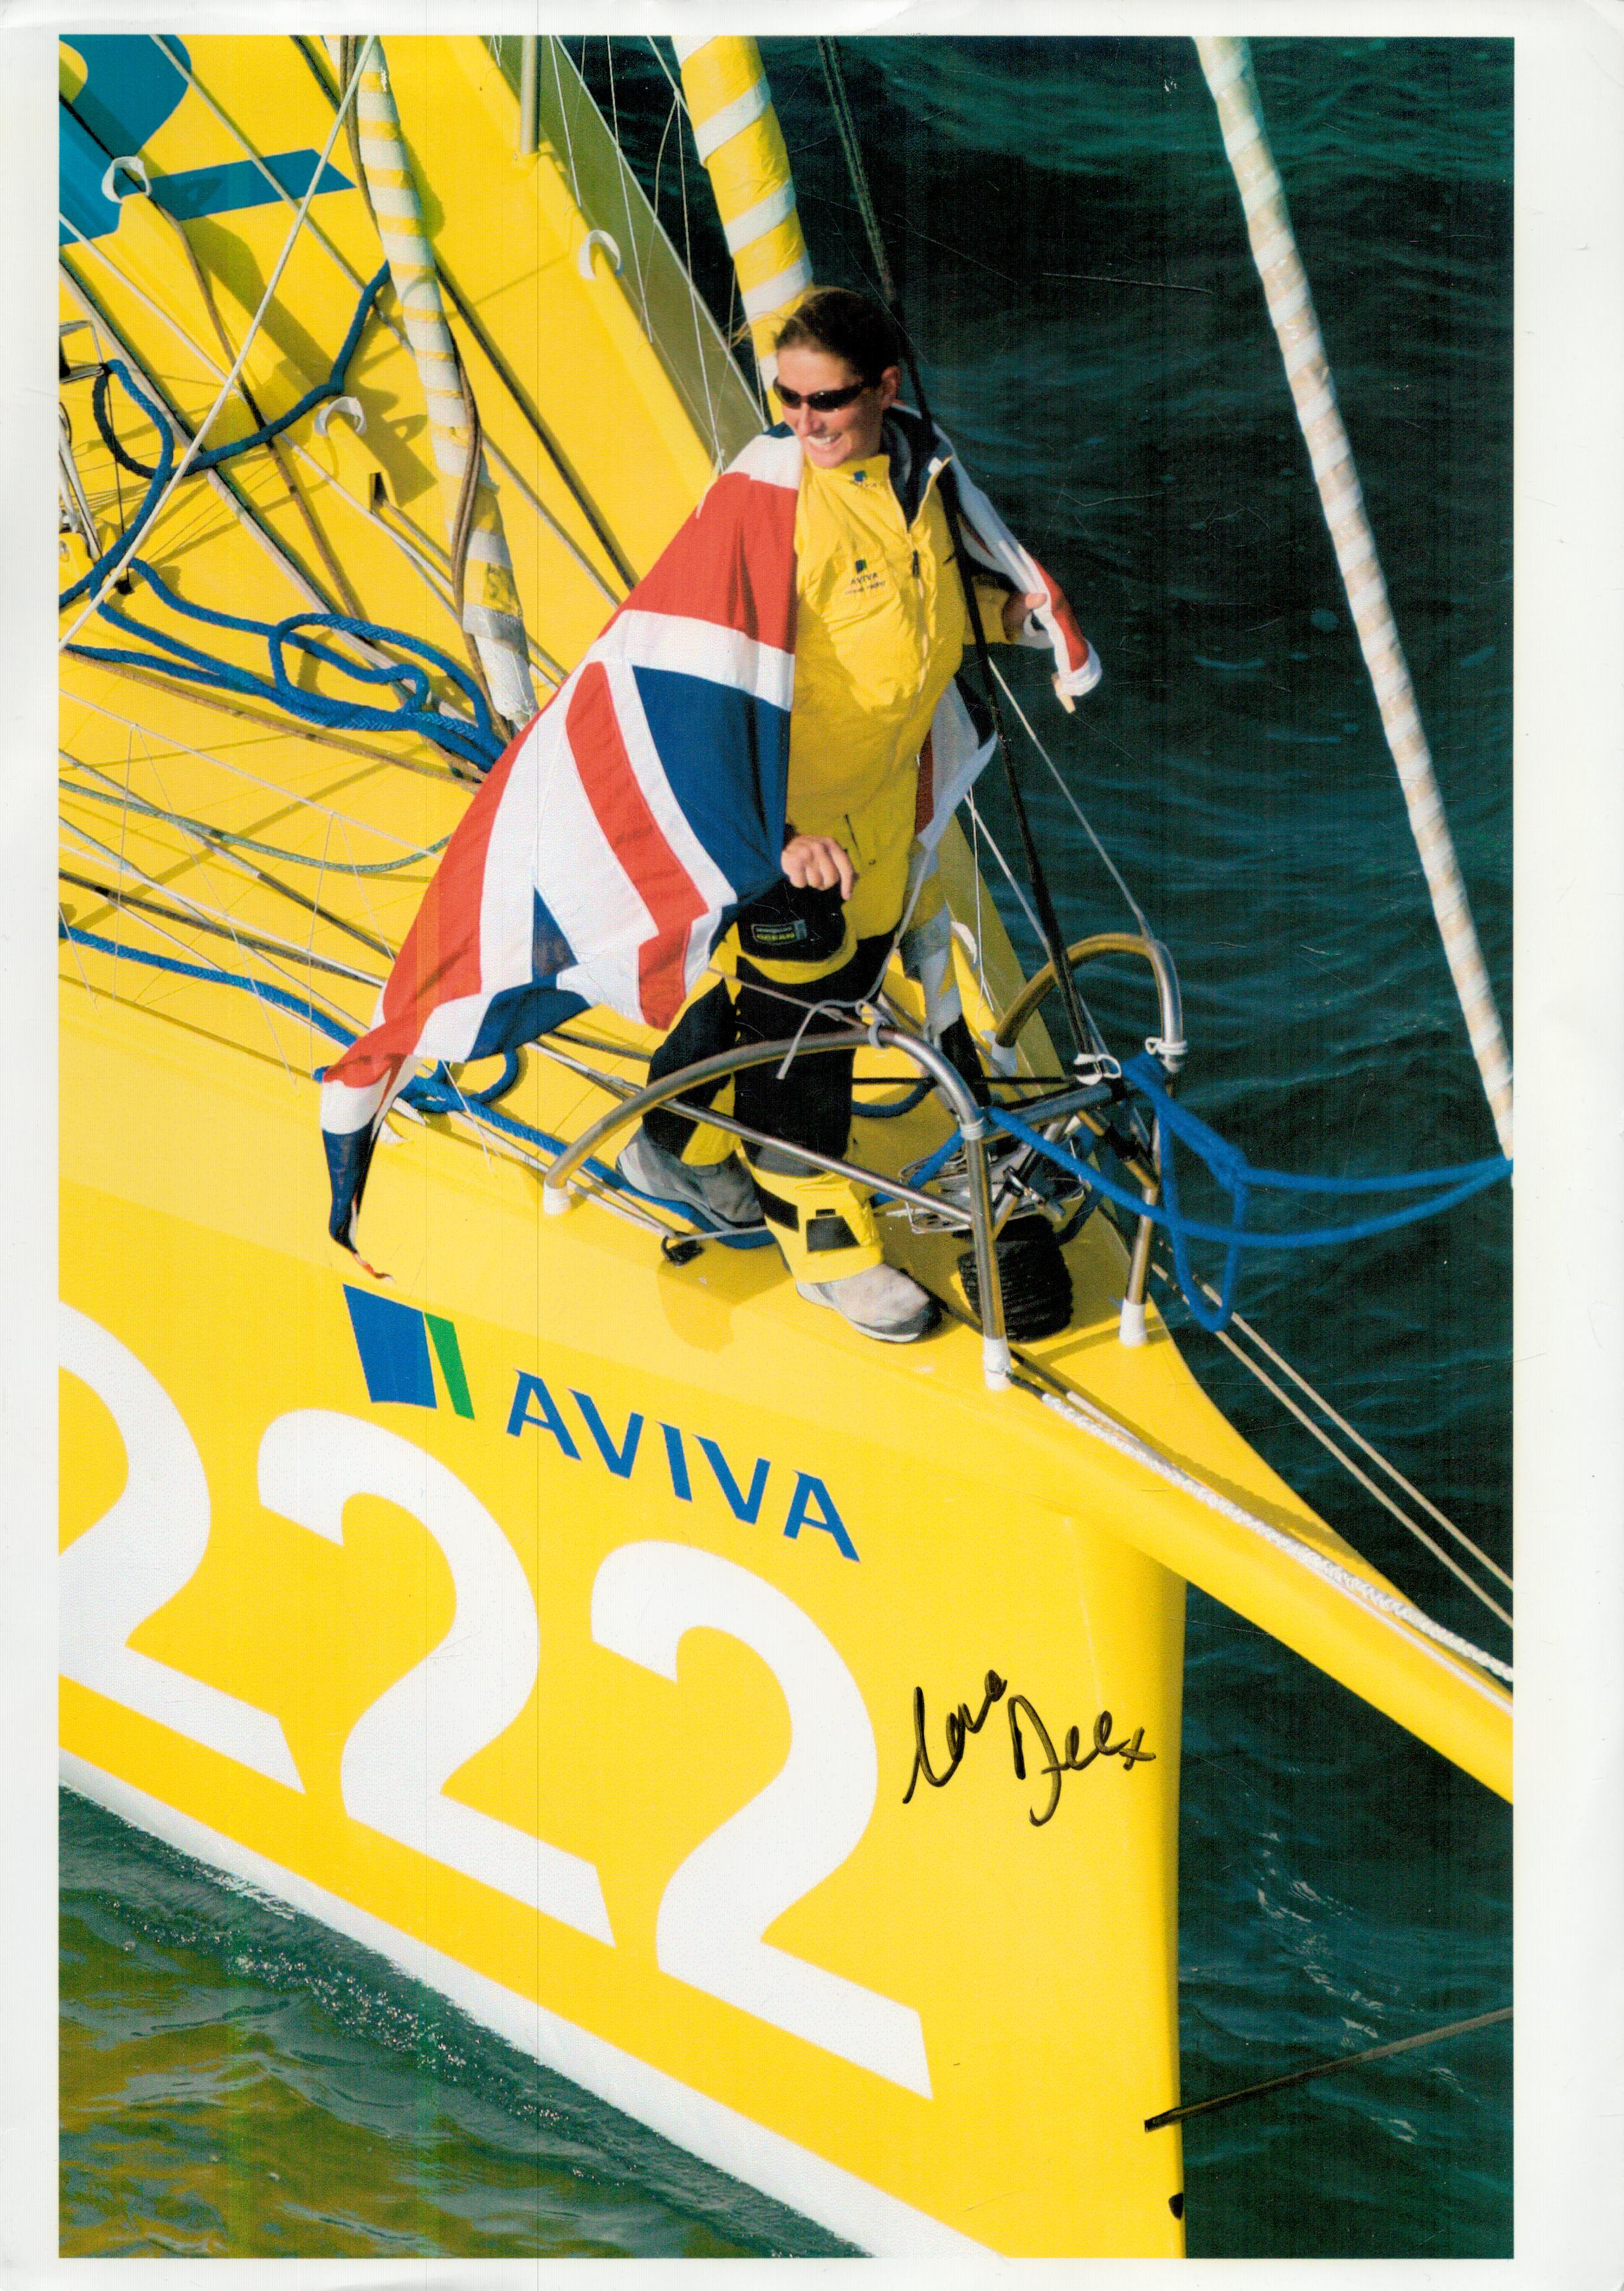 Dee Caffari signed colour photo 8.25x11.75 Inch. Is a British sailor, and in 2006 became the first